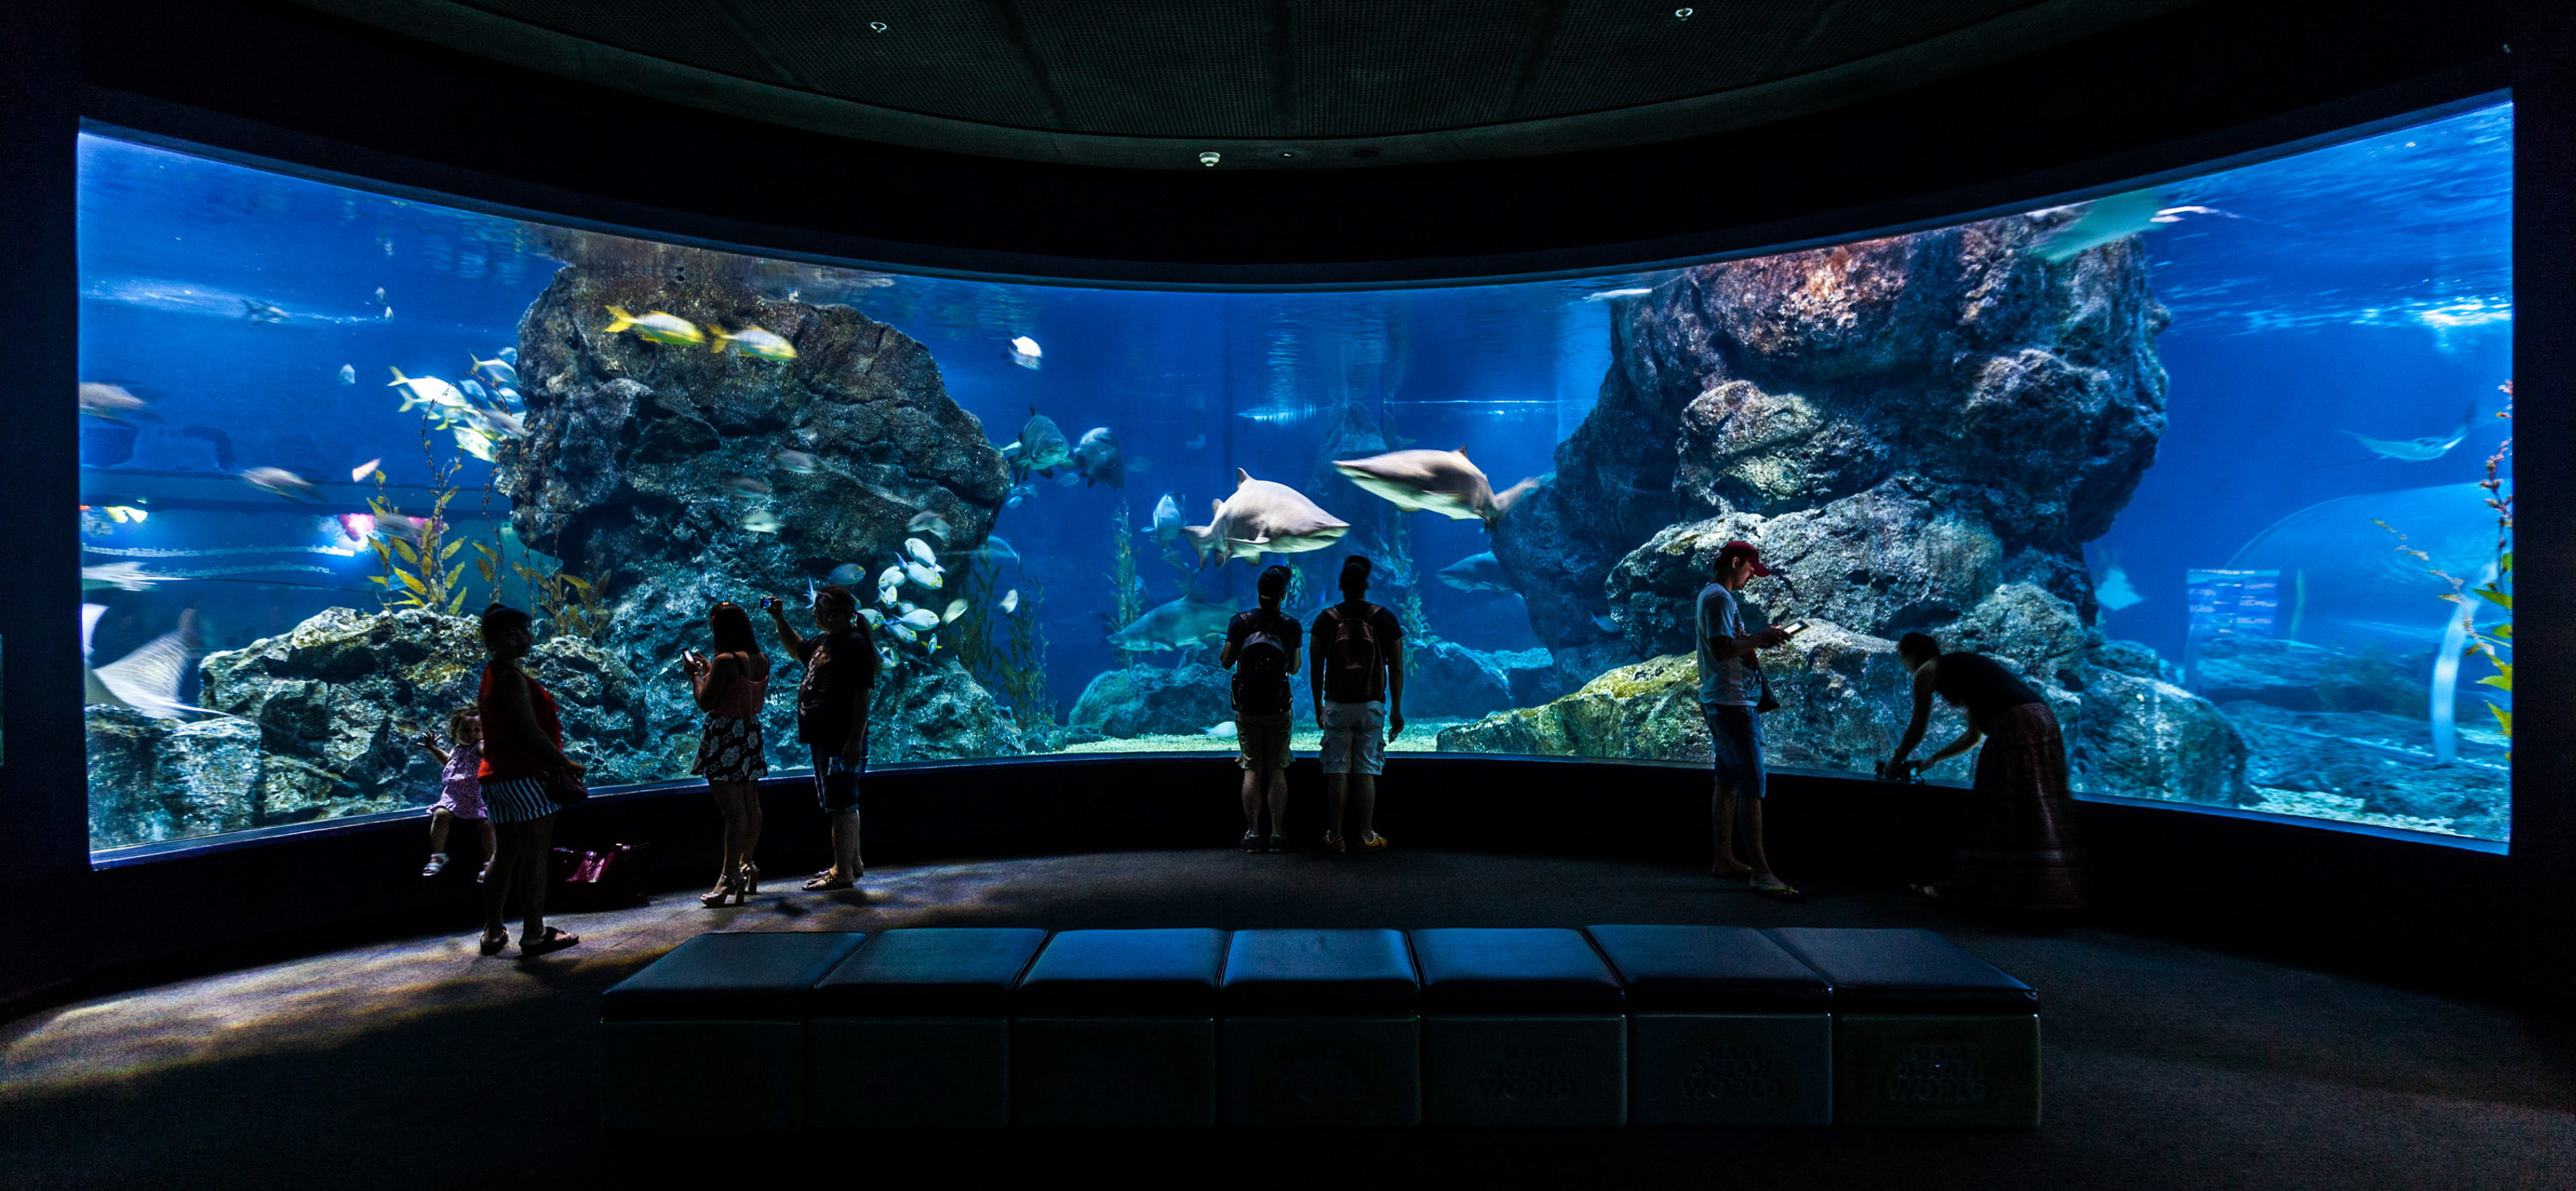 People standing in front of a large aquariumDescription automatically generated with low confidence